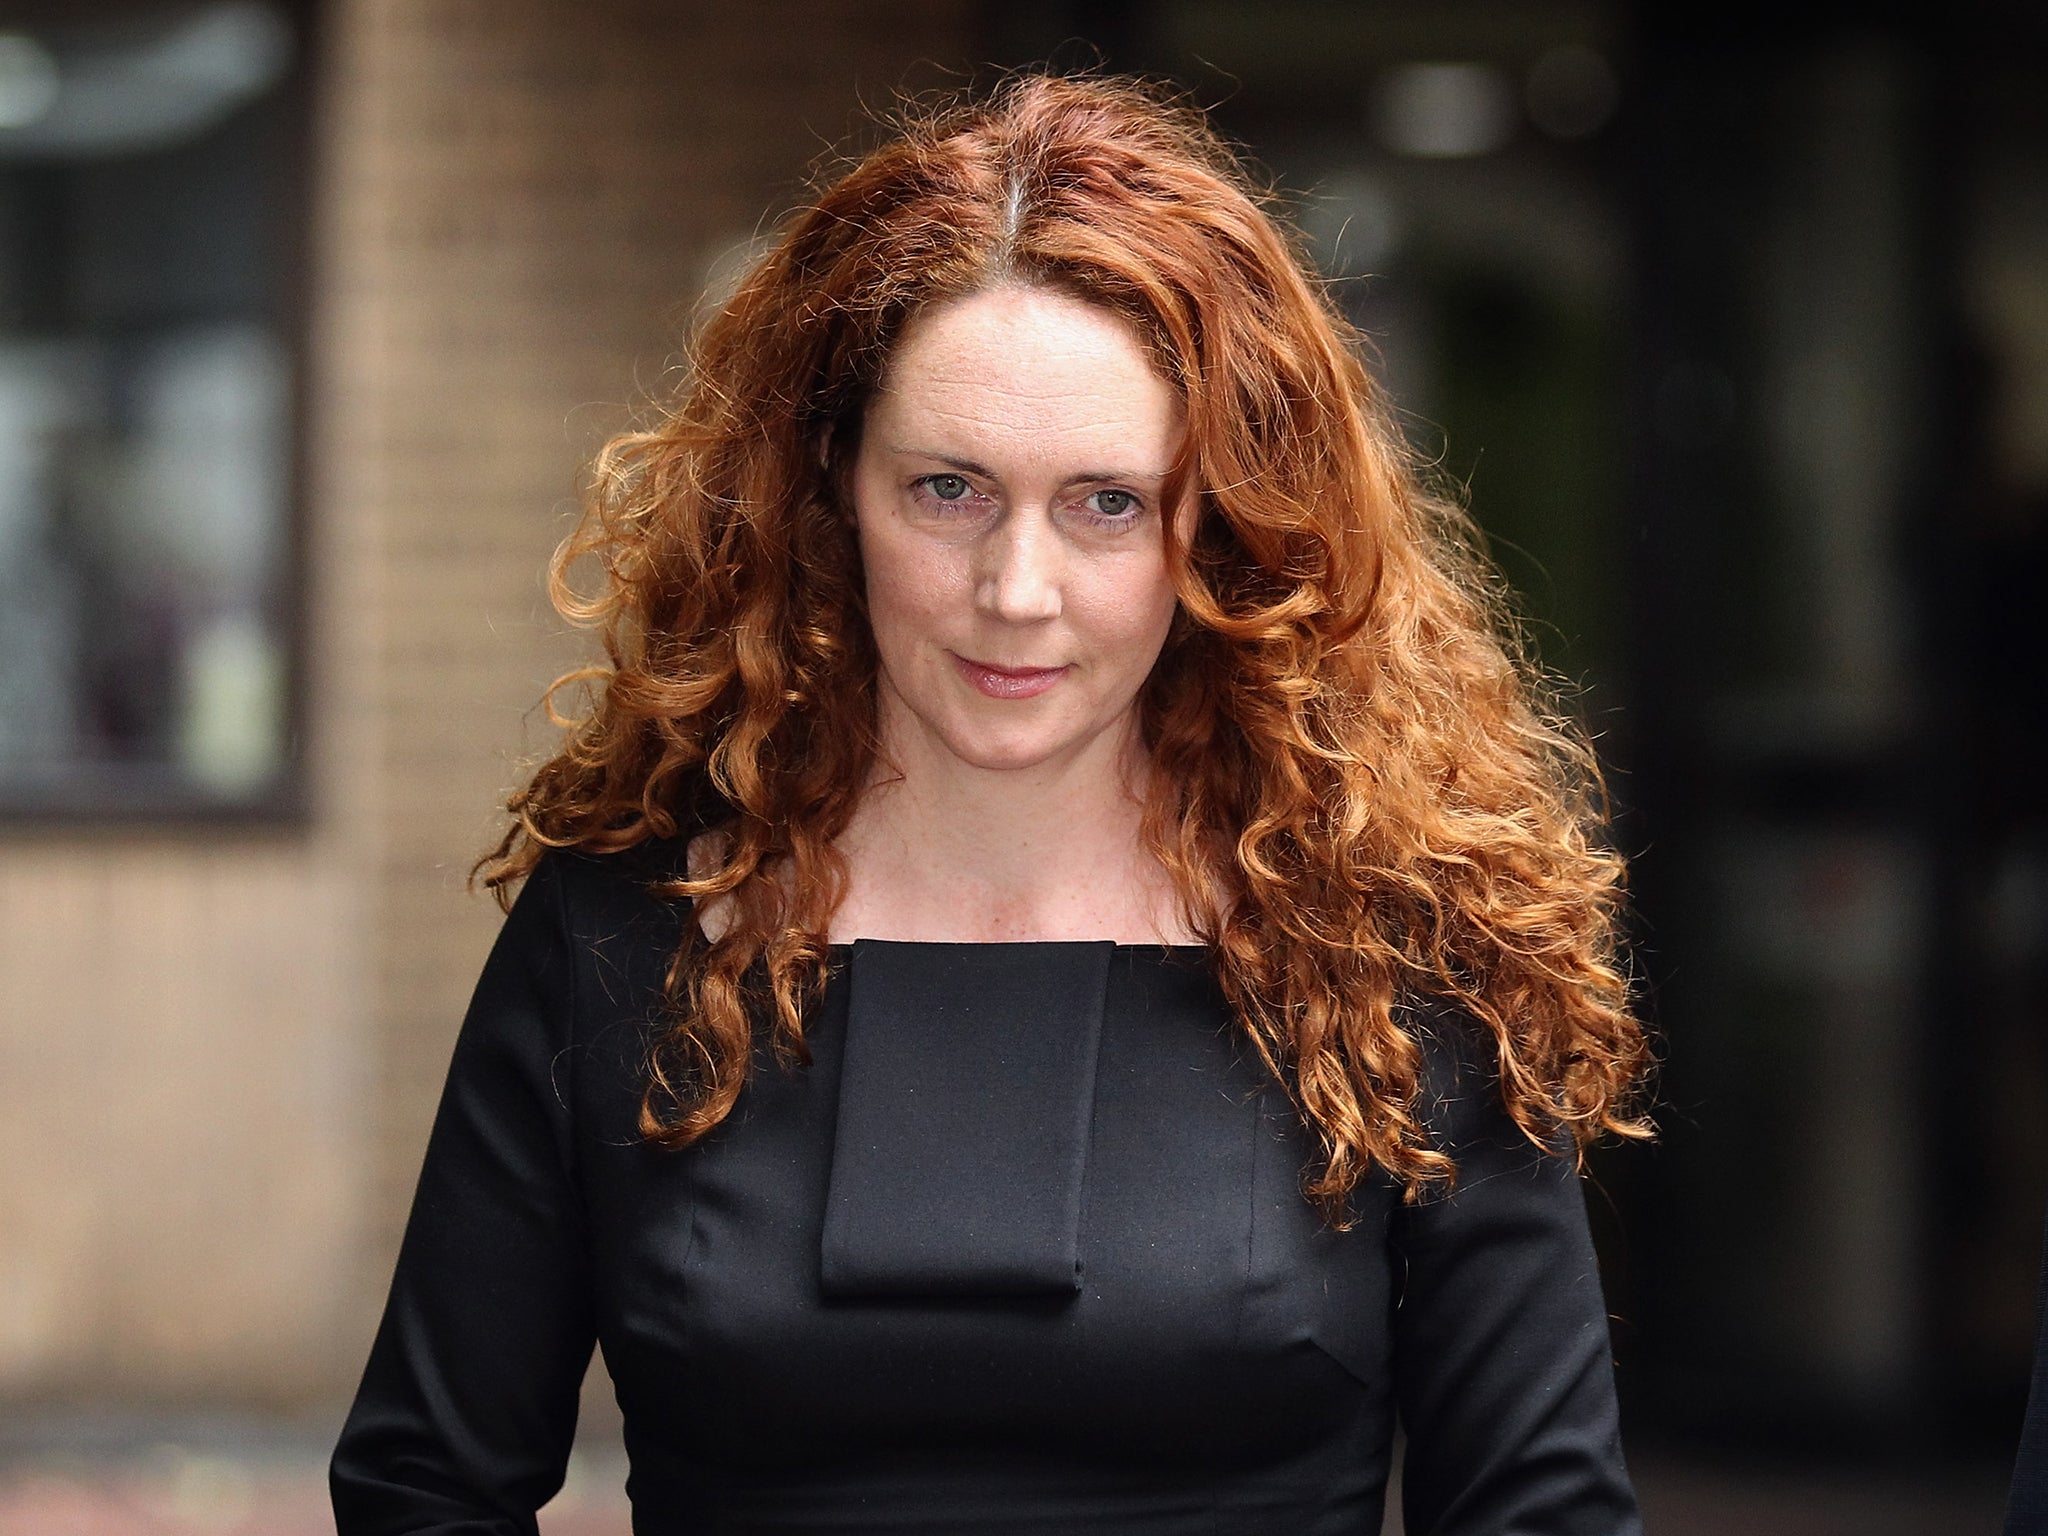 Rebekah Brooks has moved to New York for a job at News Corp